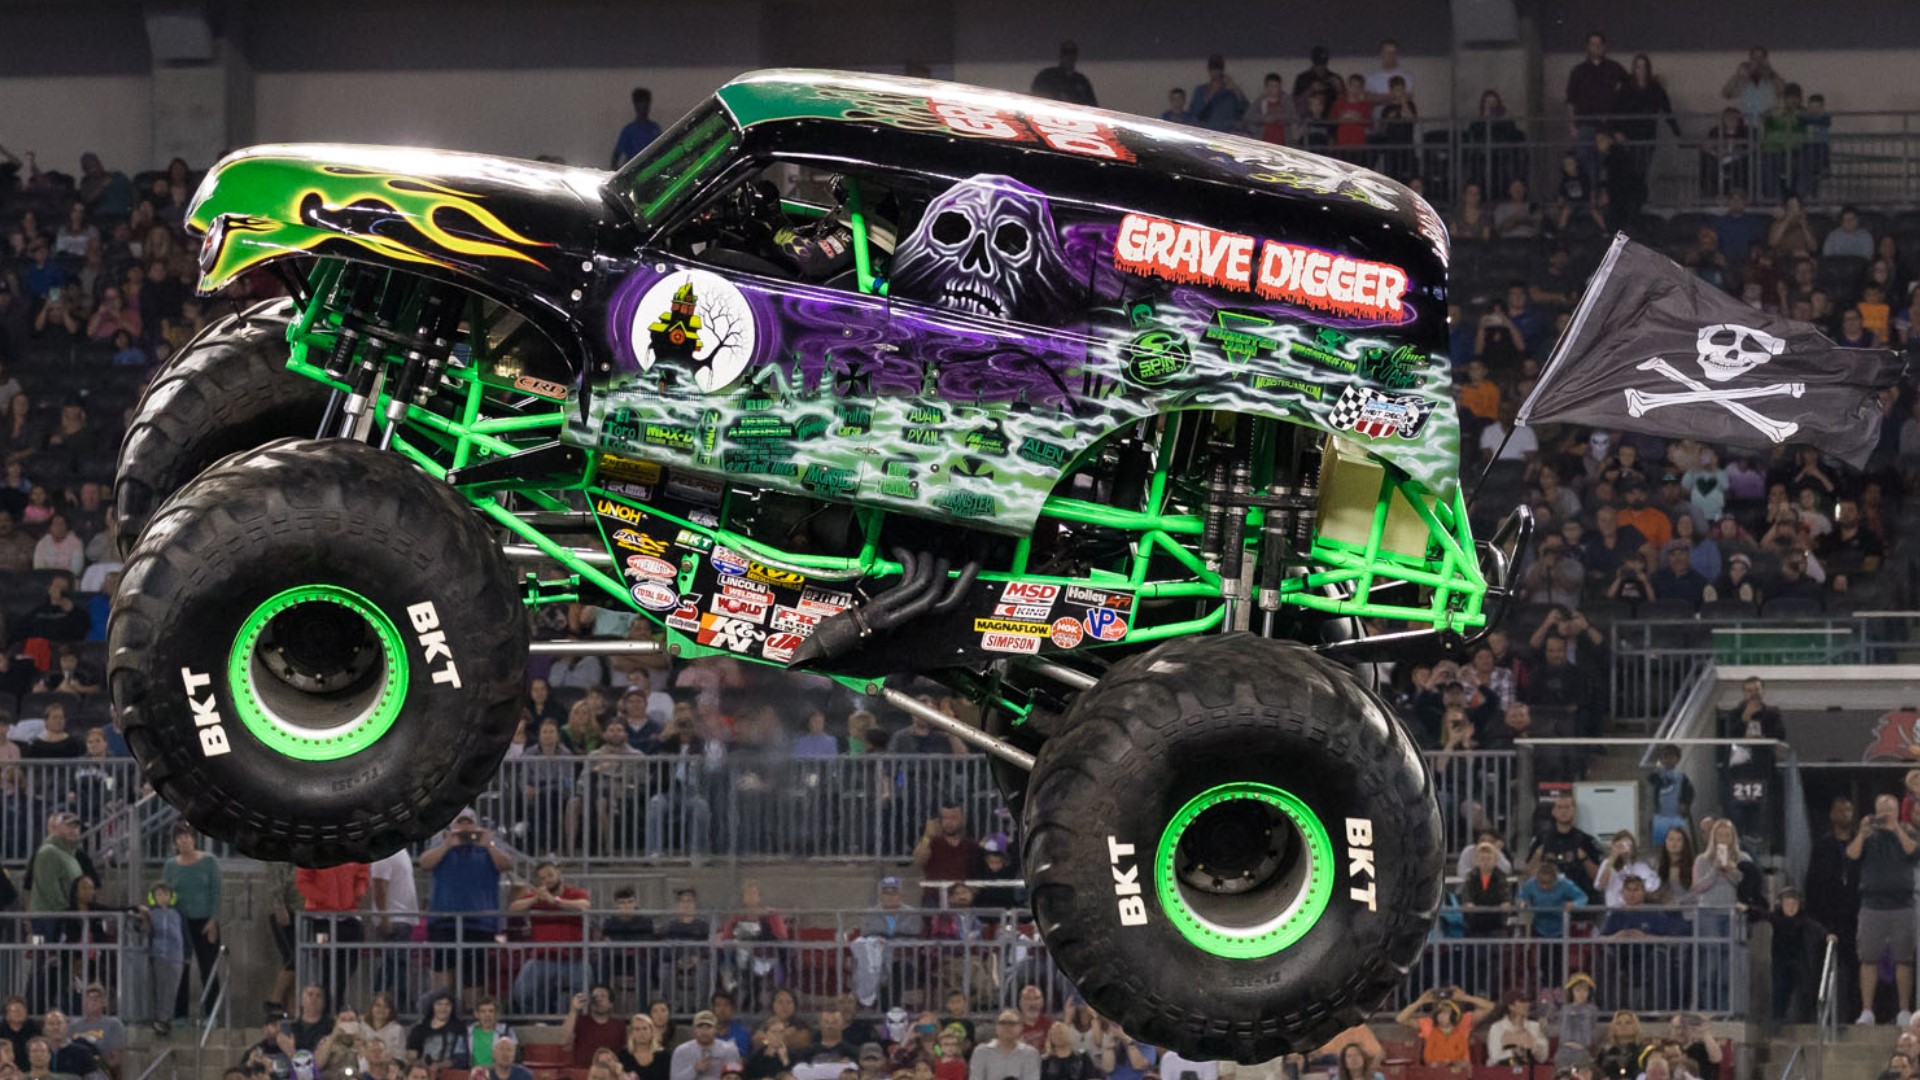 The echo of roaring engines will fill FirstEnergy Stadium this weekend as the Monster Jam Stadium Championship races into downtown Cleveland.